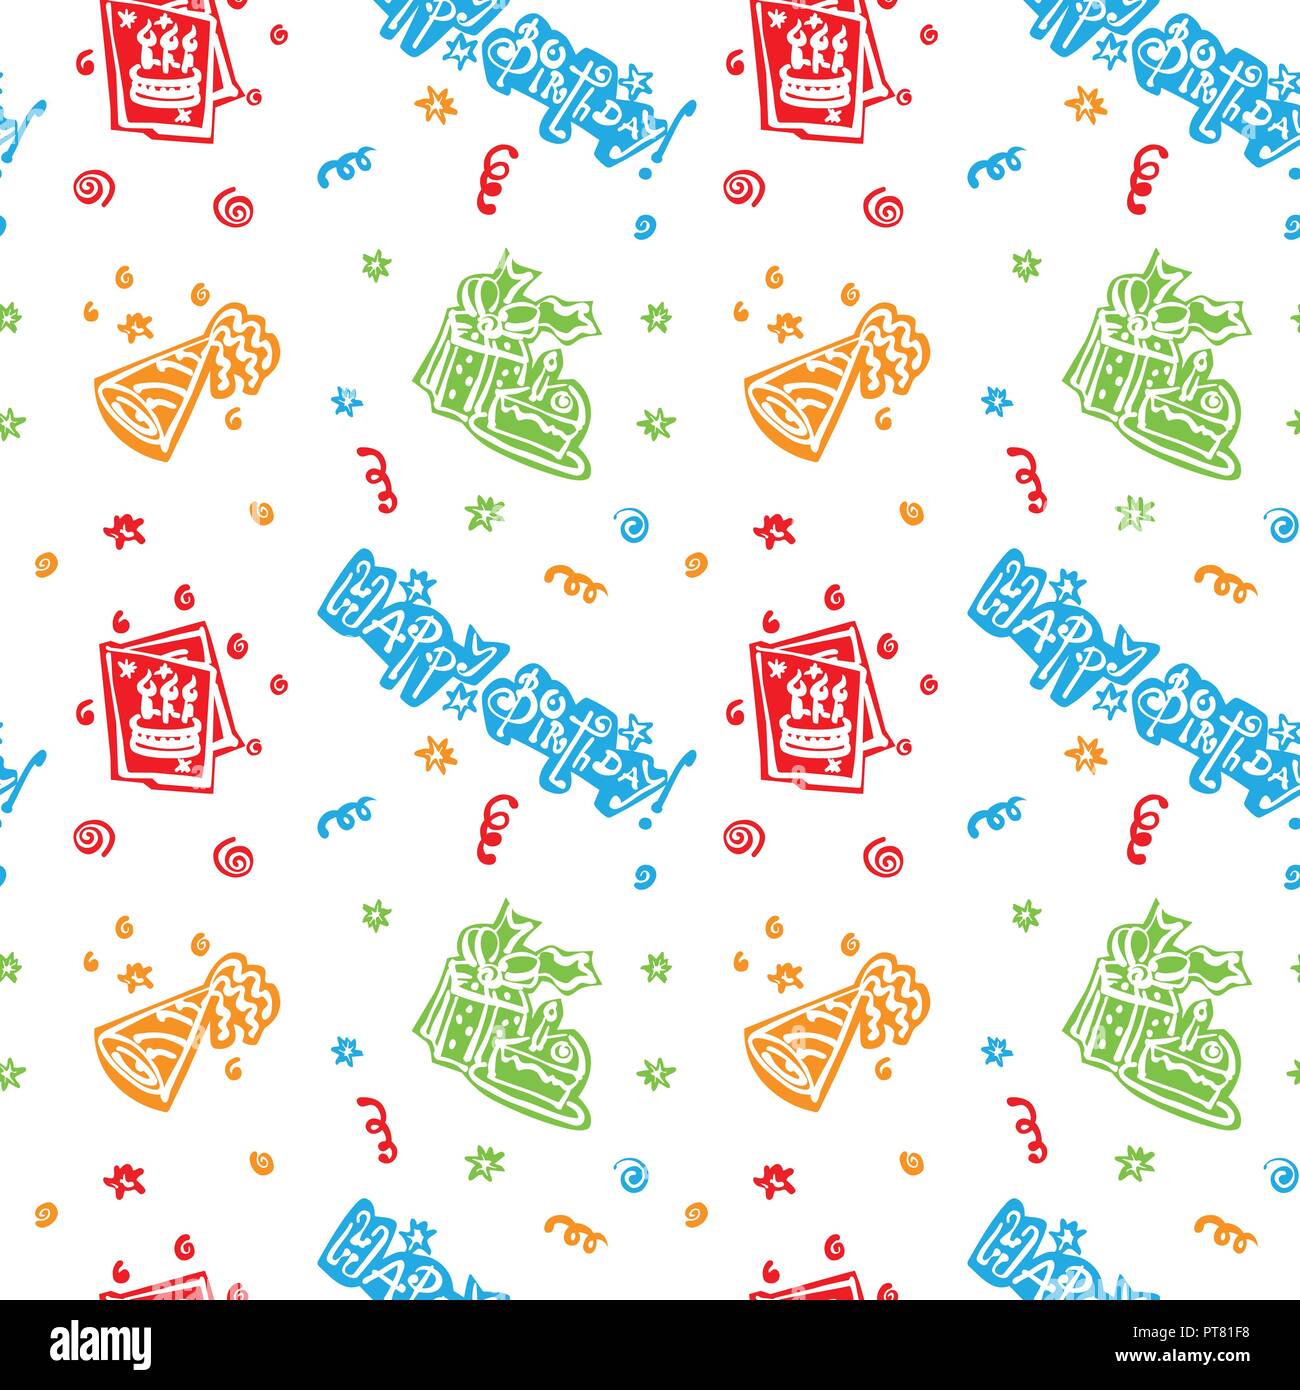 colorful Happy birthday pattern Background Stock Vector